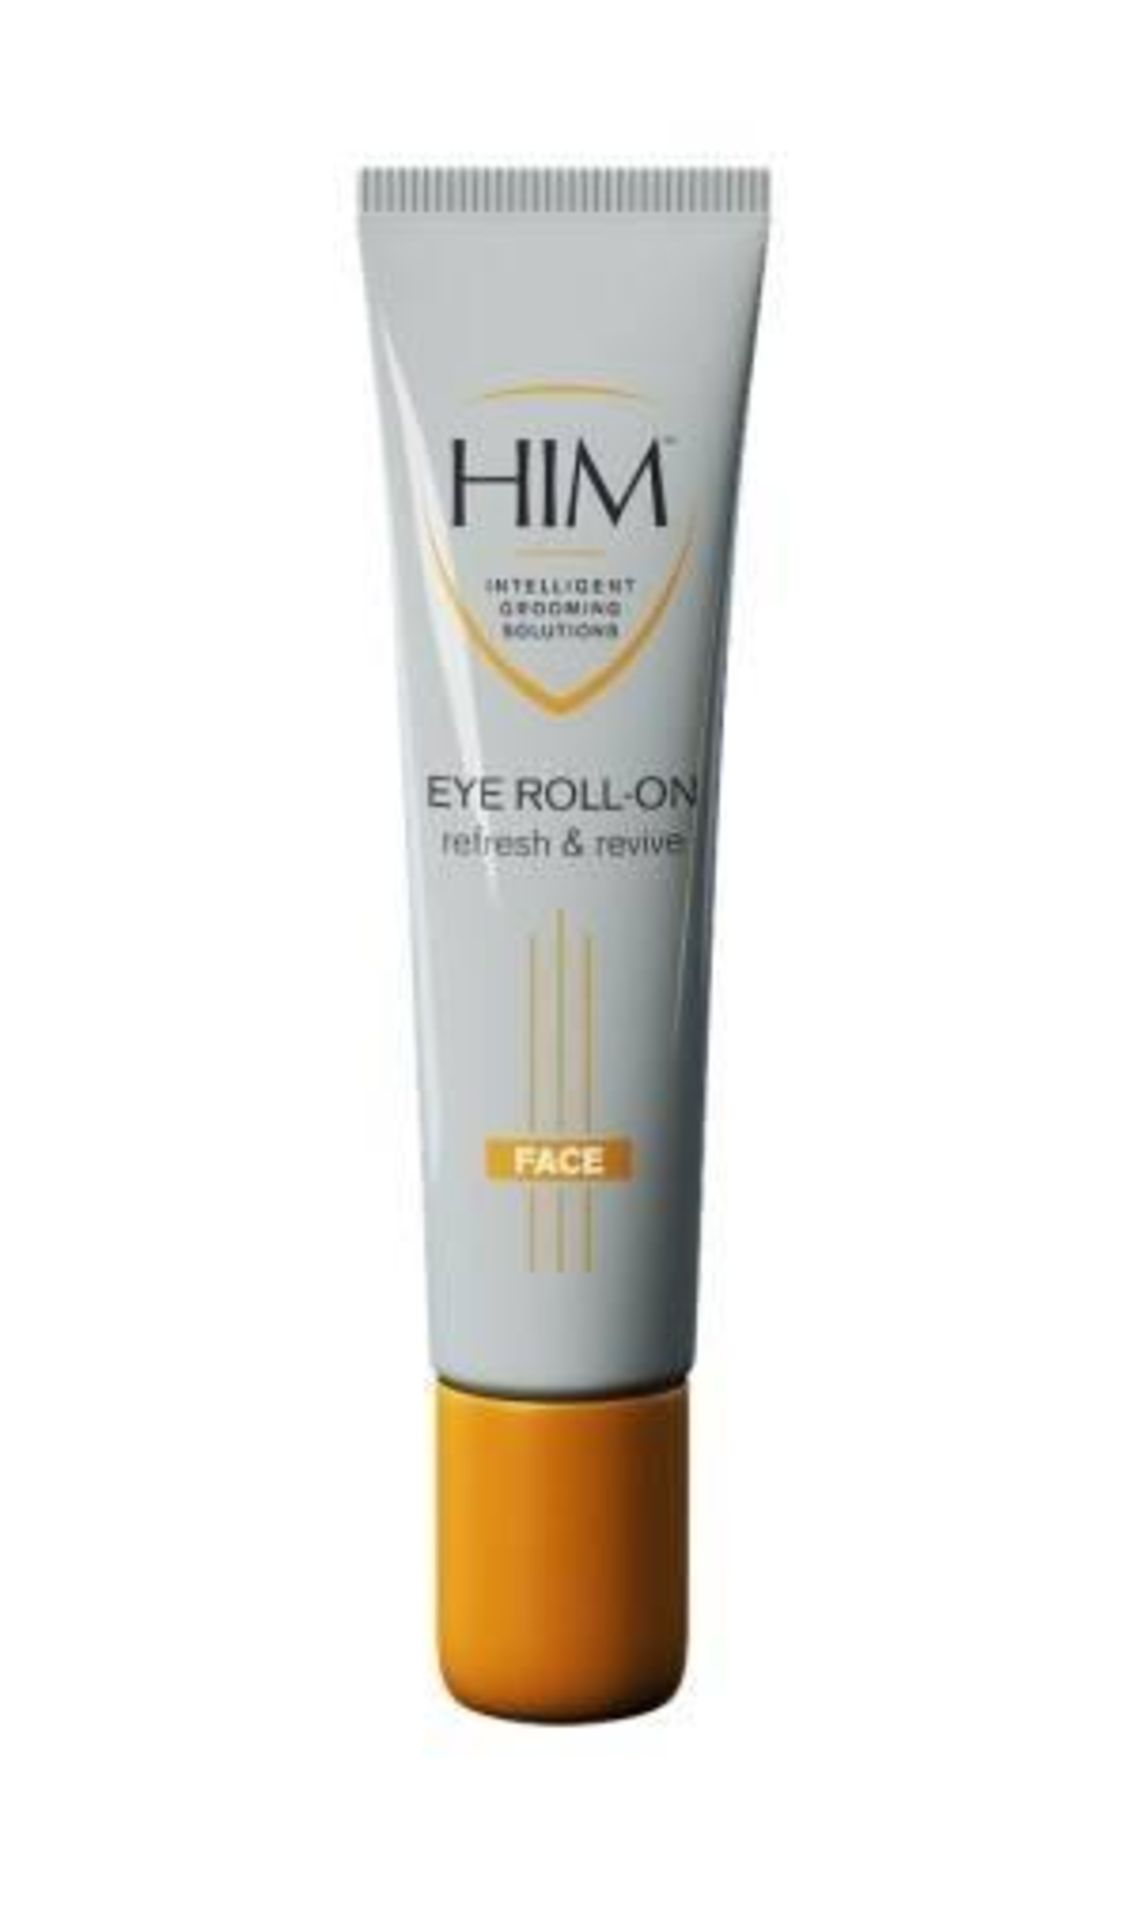 Approx. 95 x HIM Intelligent Grooming Solutions - 10ml EYE ROLL ON - Unused Boxed Stock - Ready For